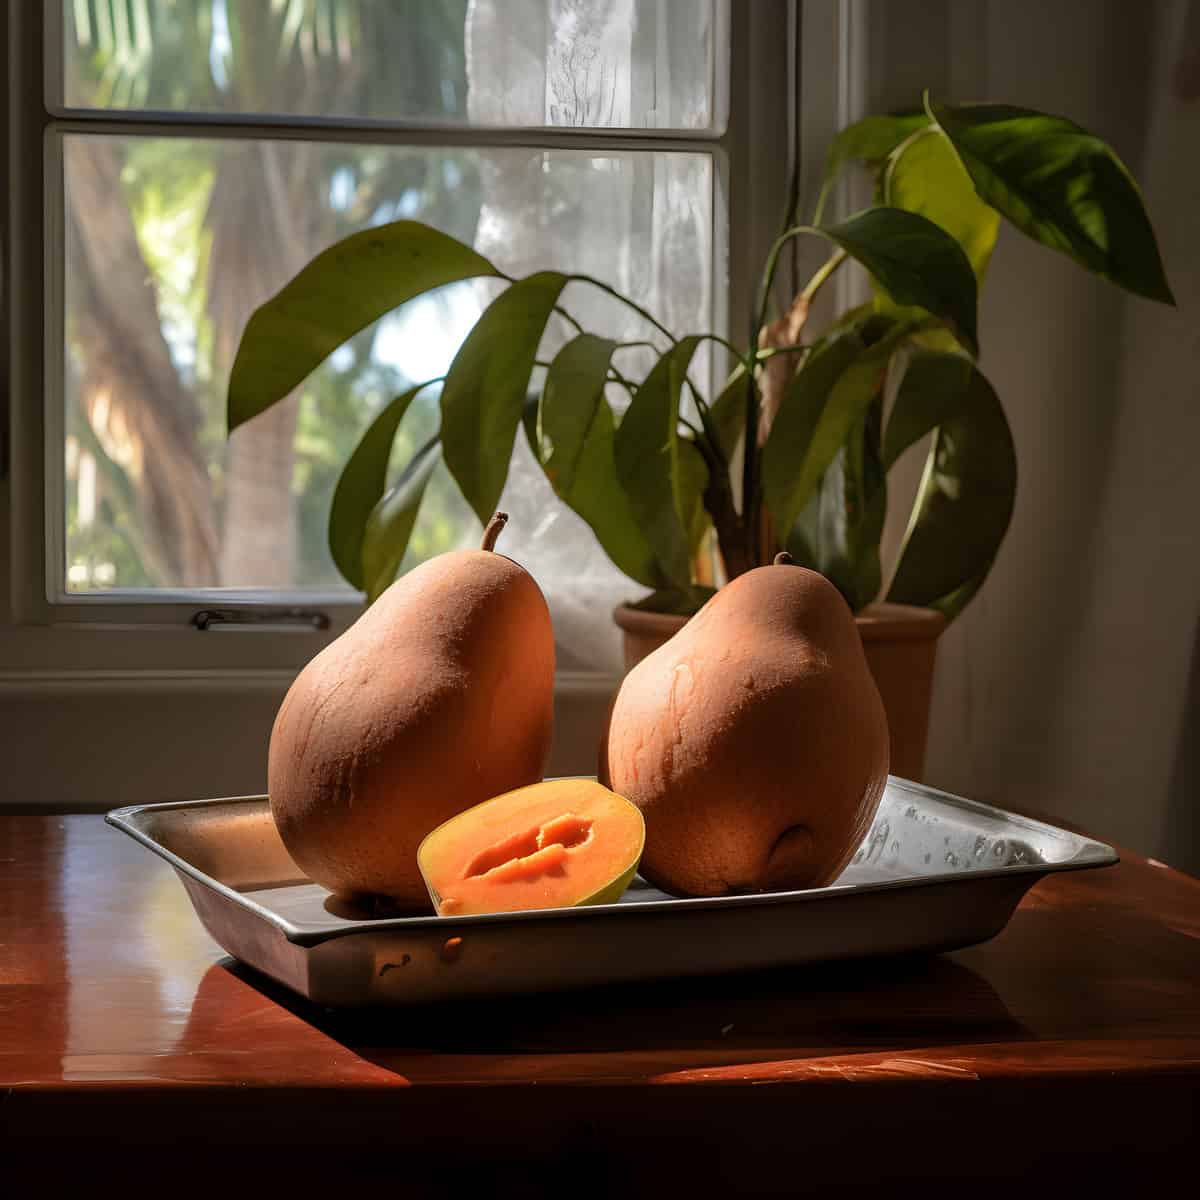 Mamey Sapote on a kitchen counter